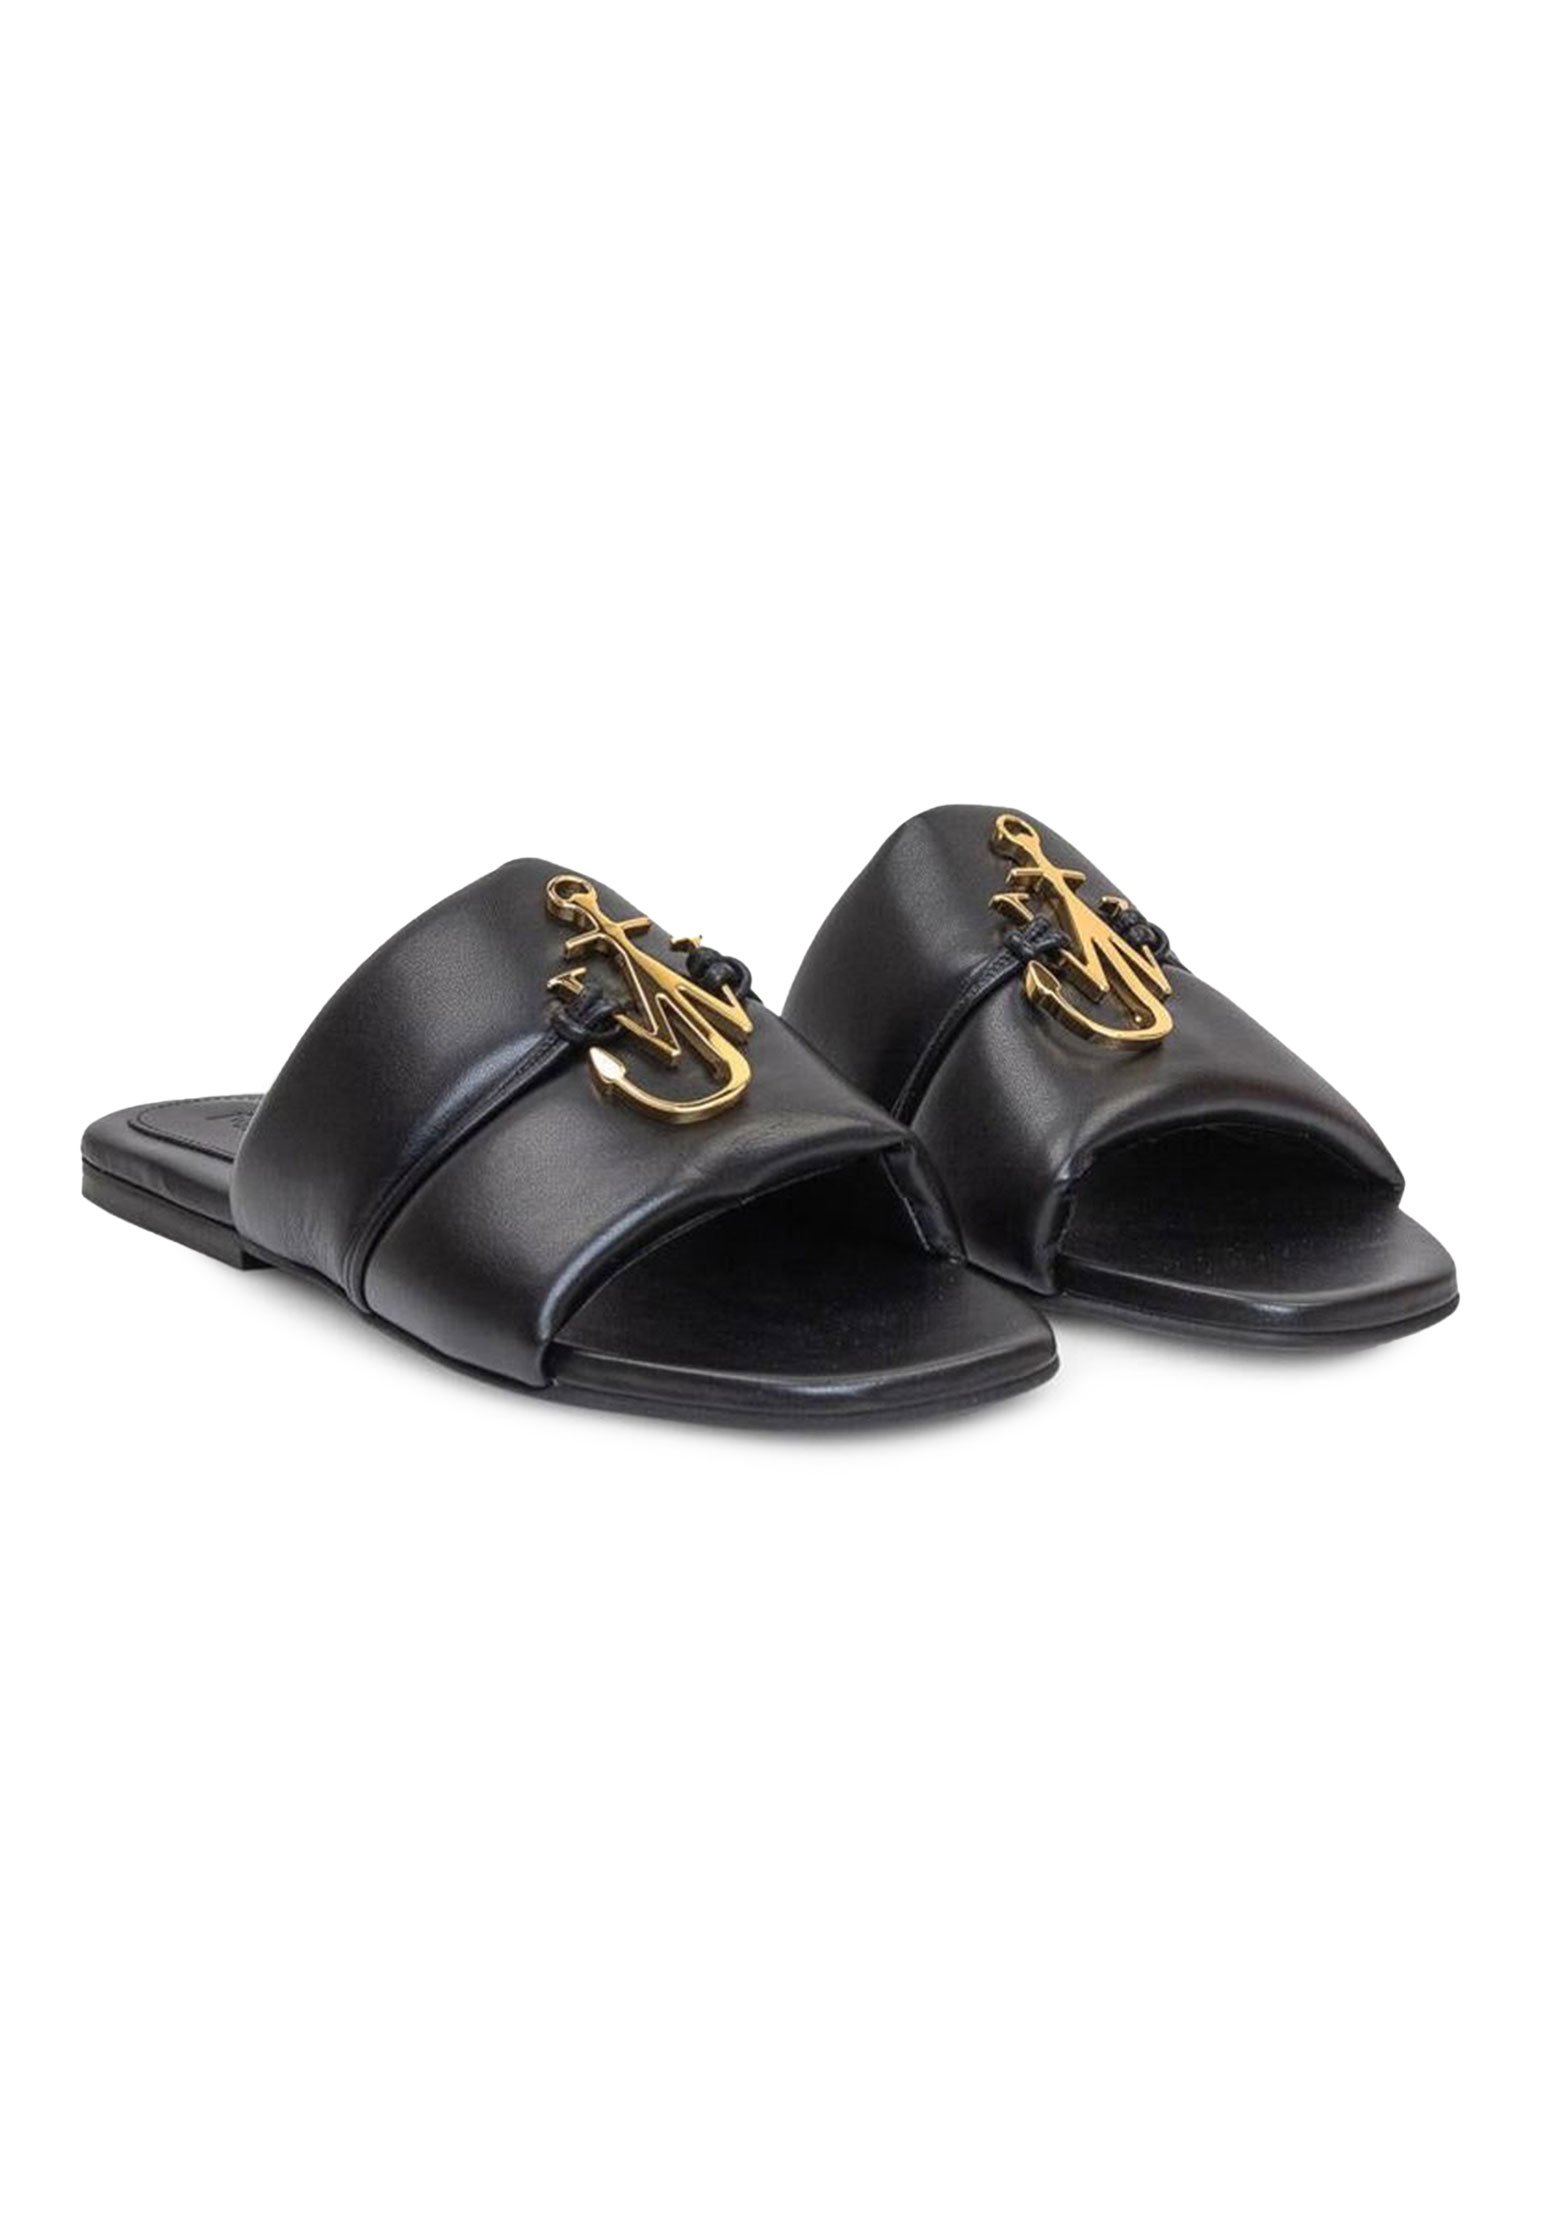 Slippers J.W. ANDERSON Color: black (Code: 1354) in online store Allure